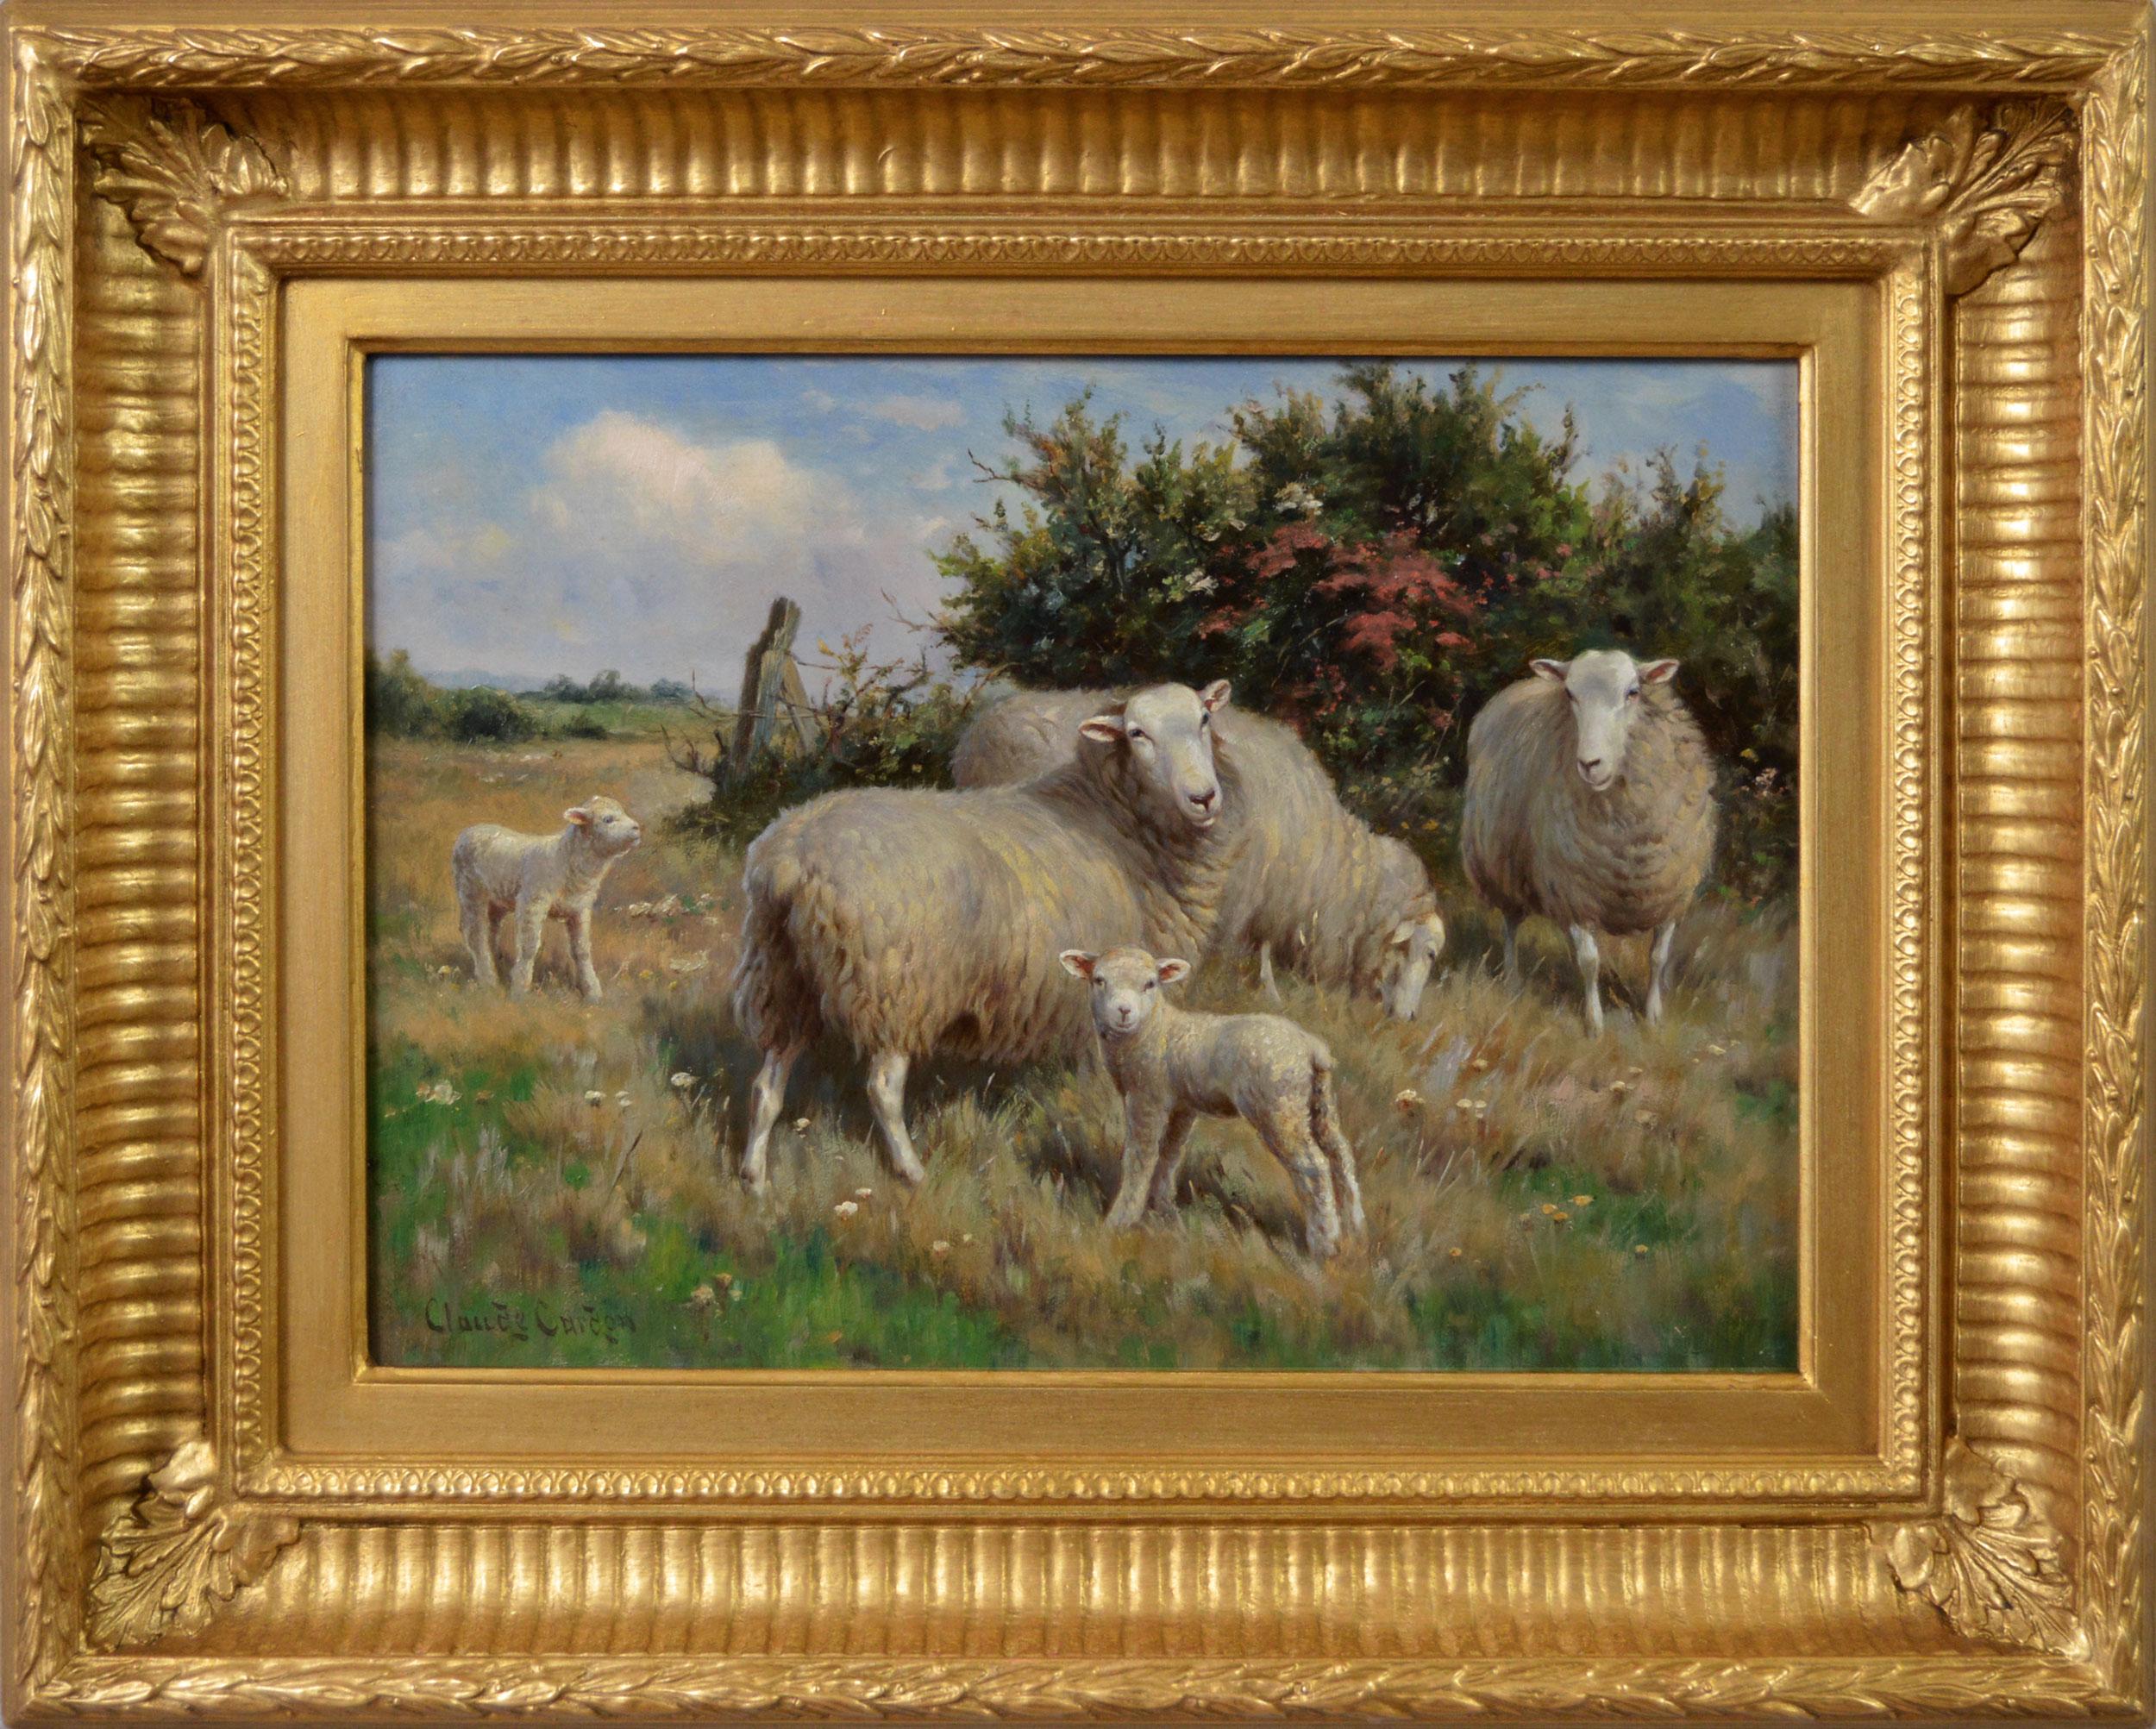 19th Century landscape animal oil painting of sheep with lambs